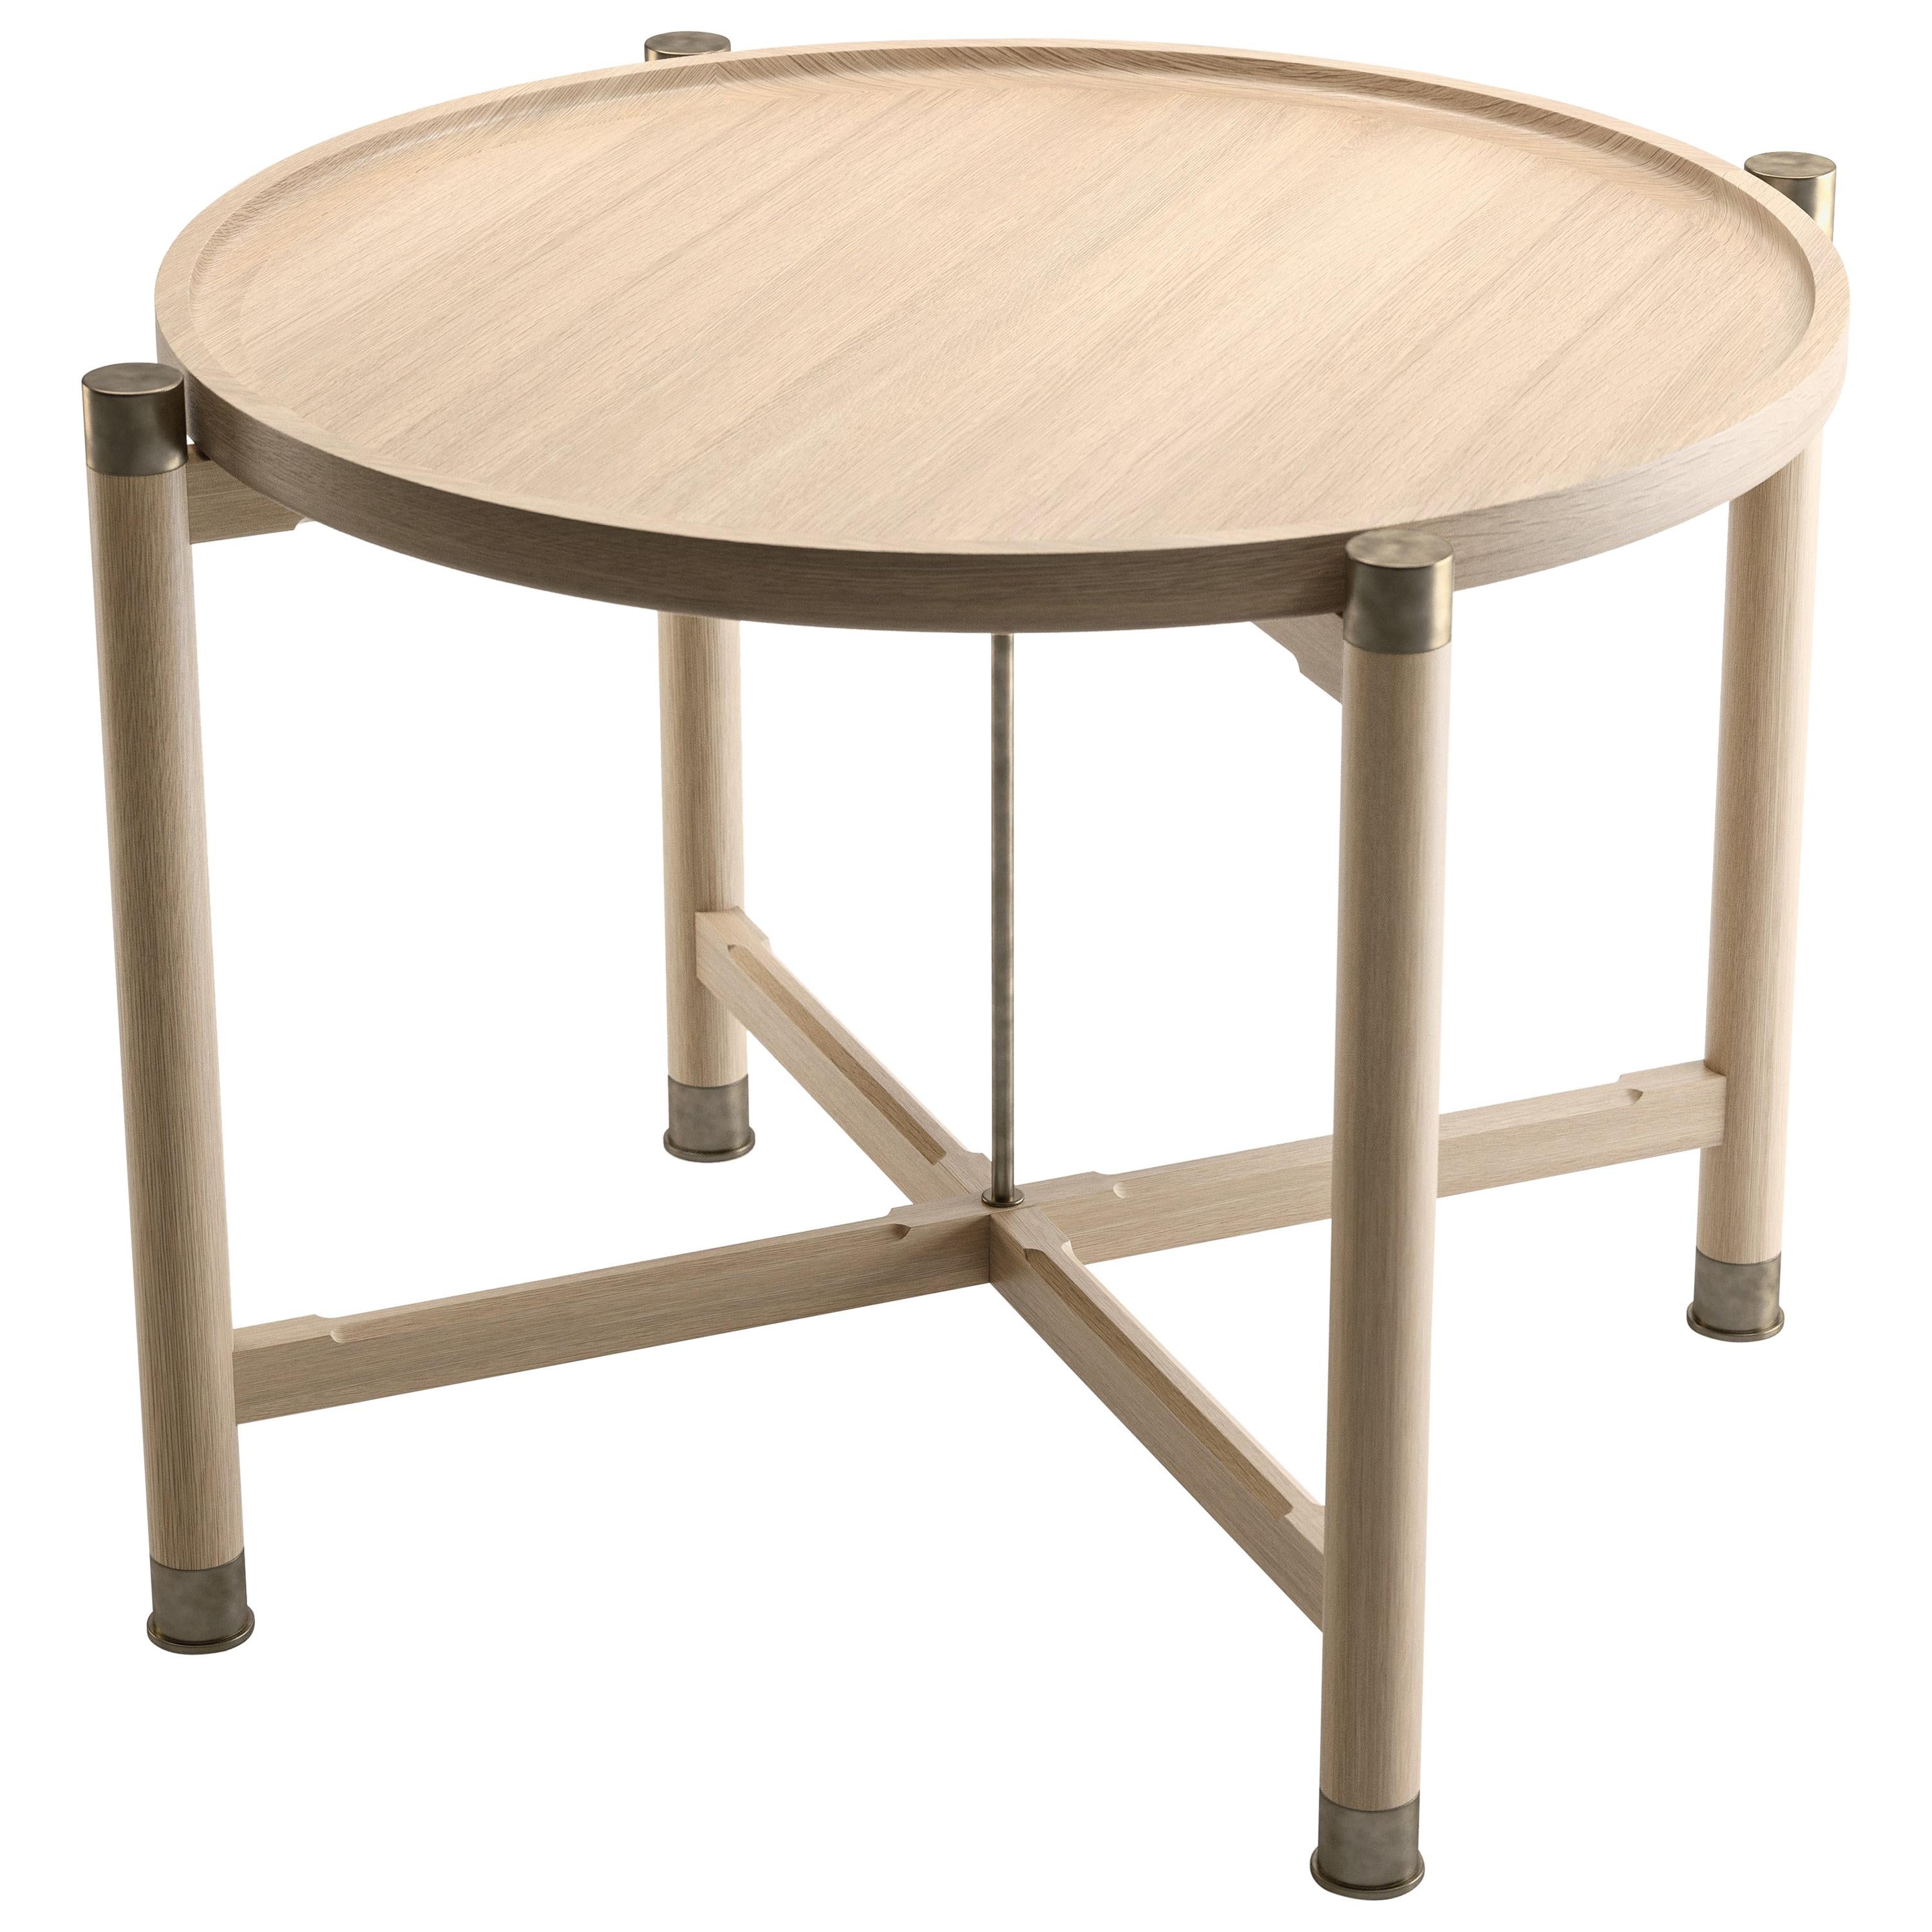 Otto Round Side Table in Bleached Oak with Antique Brass Fittings and Stem